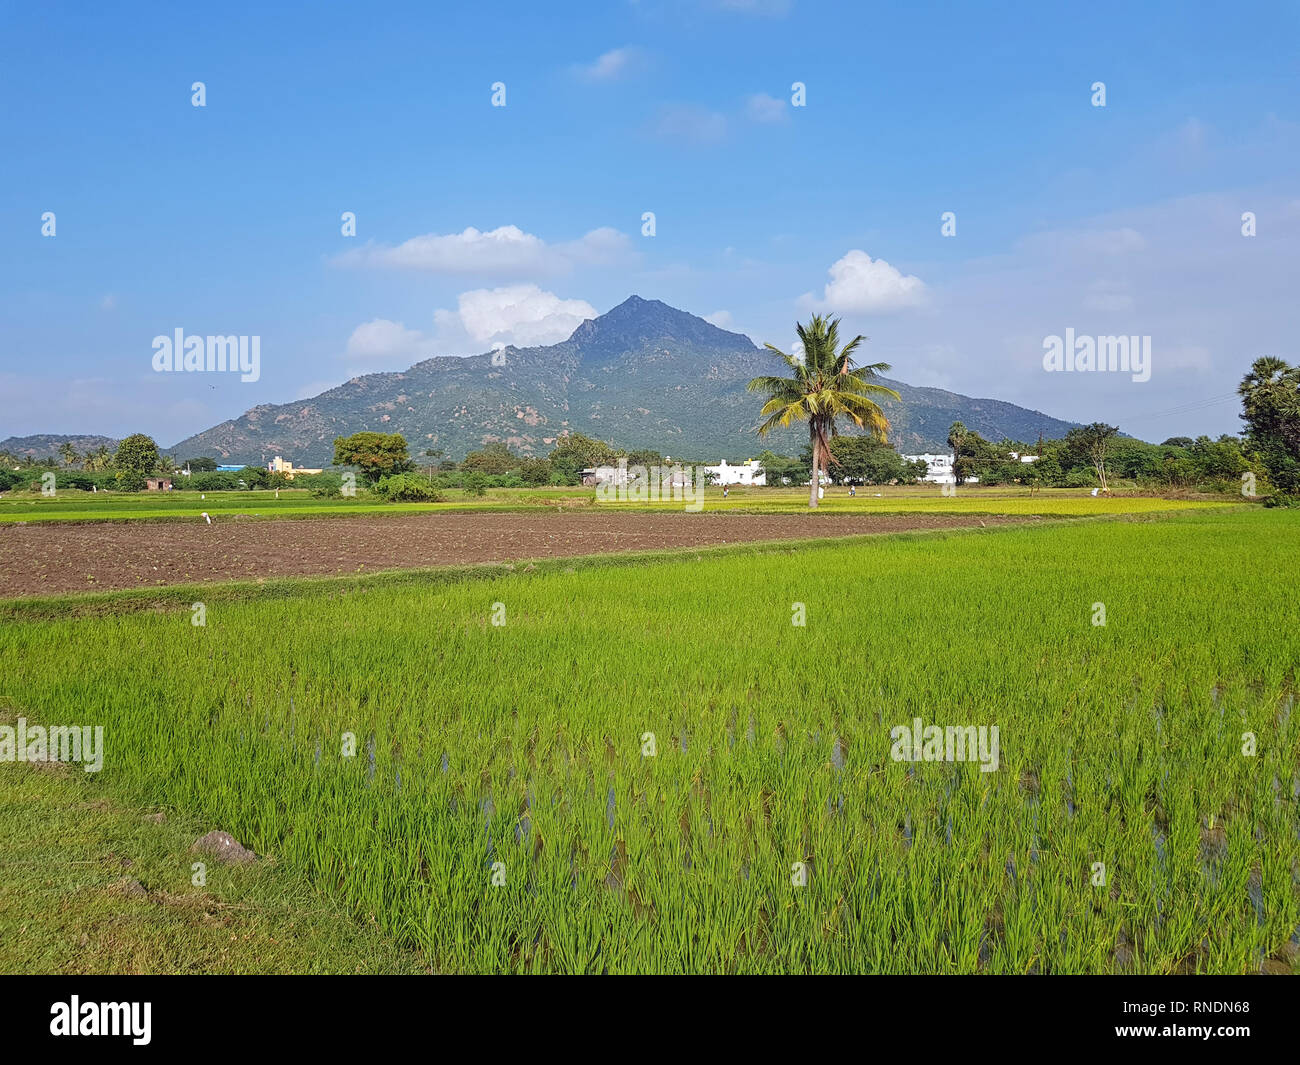 The holy mountain Arunachala is referred to in the ancient scriptures as the oldest mountain on earth and modern research has confirmed that Arunachal Stock Photo